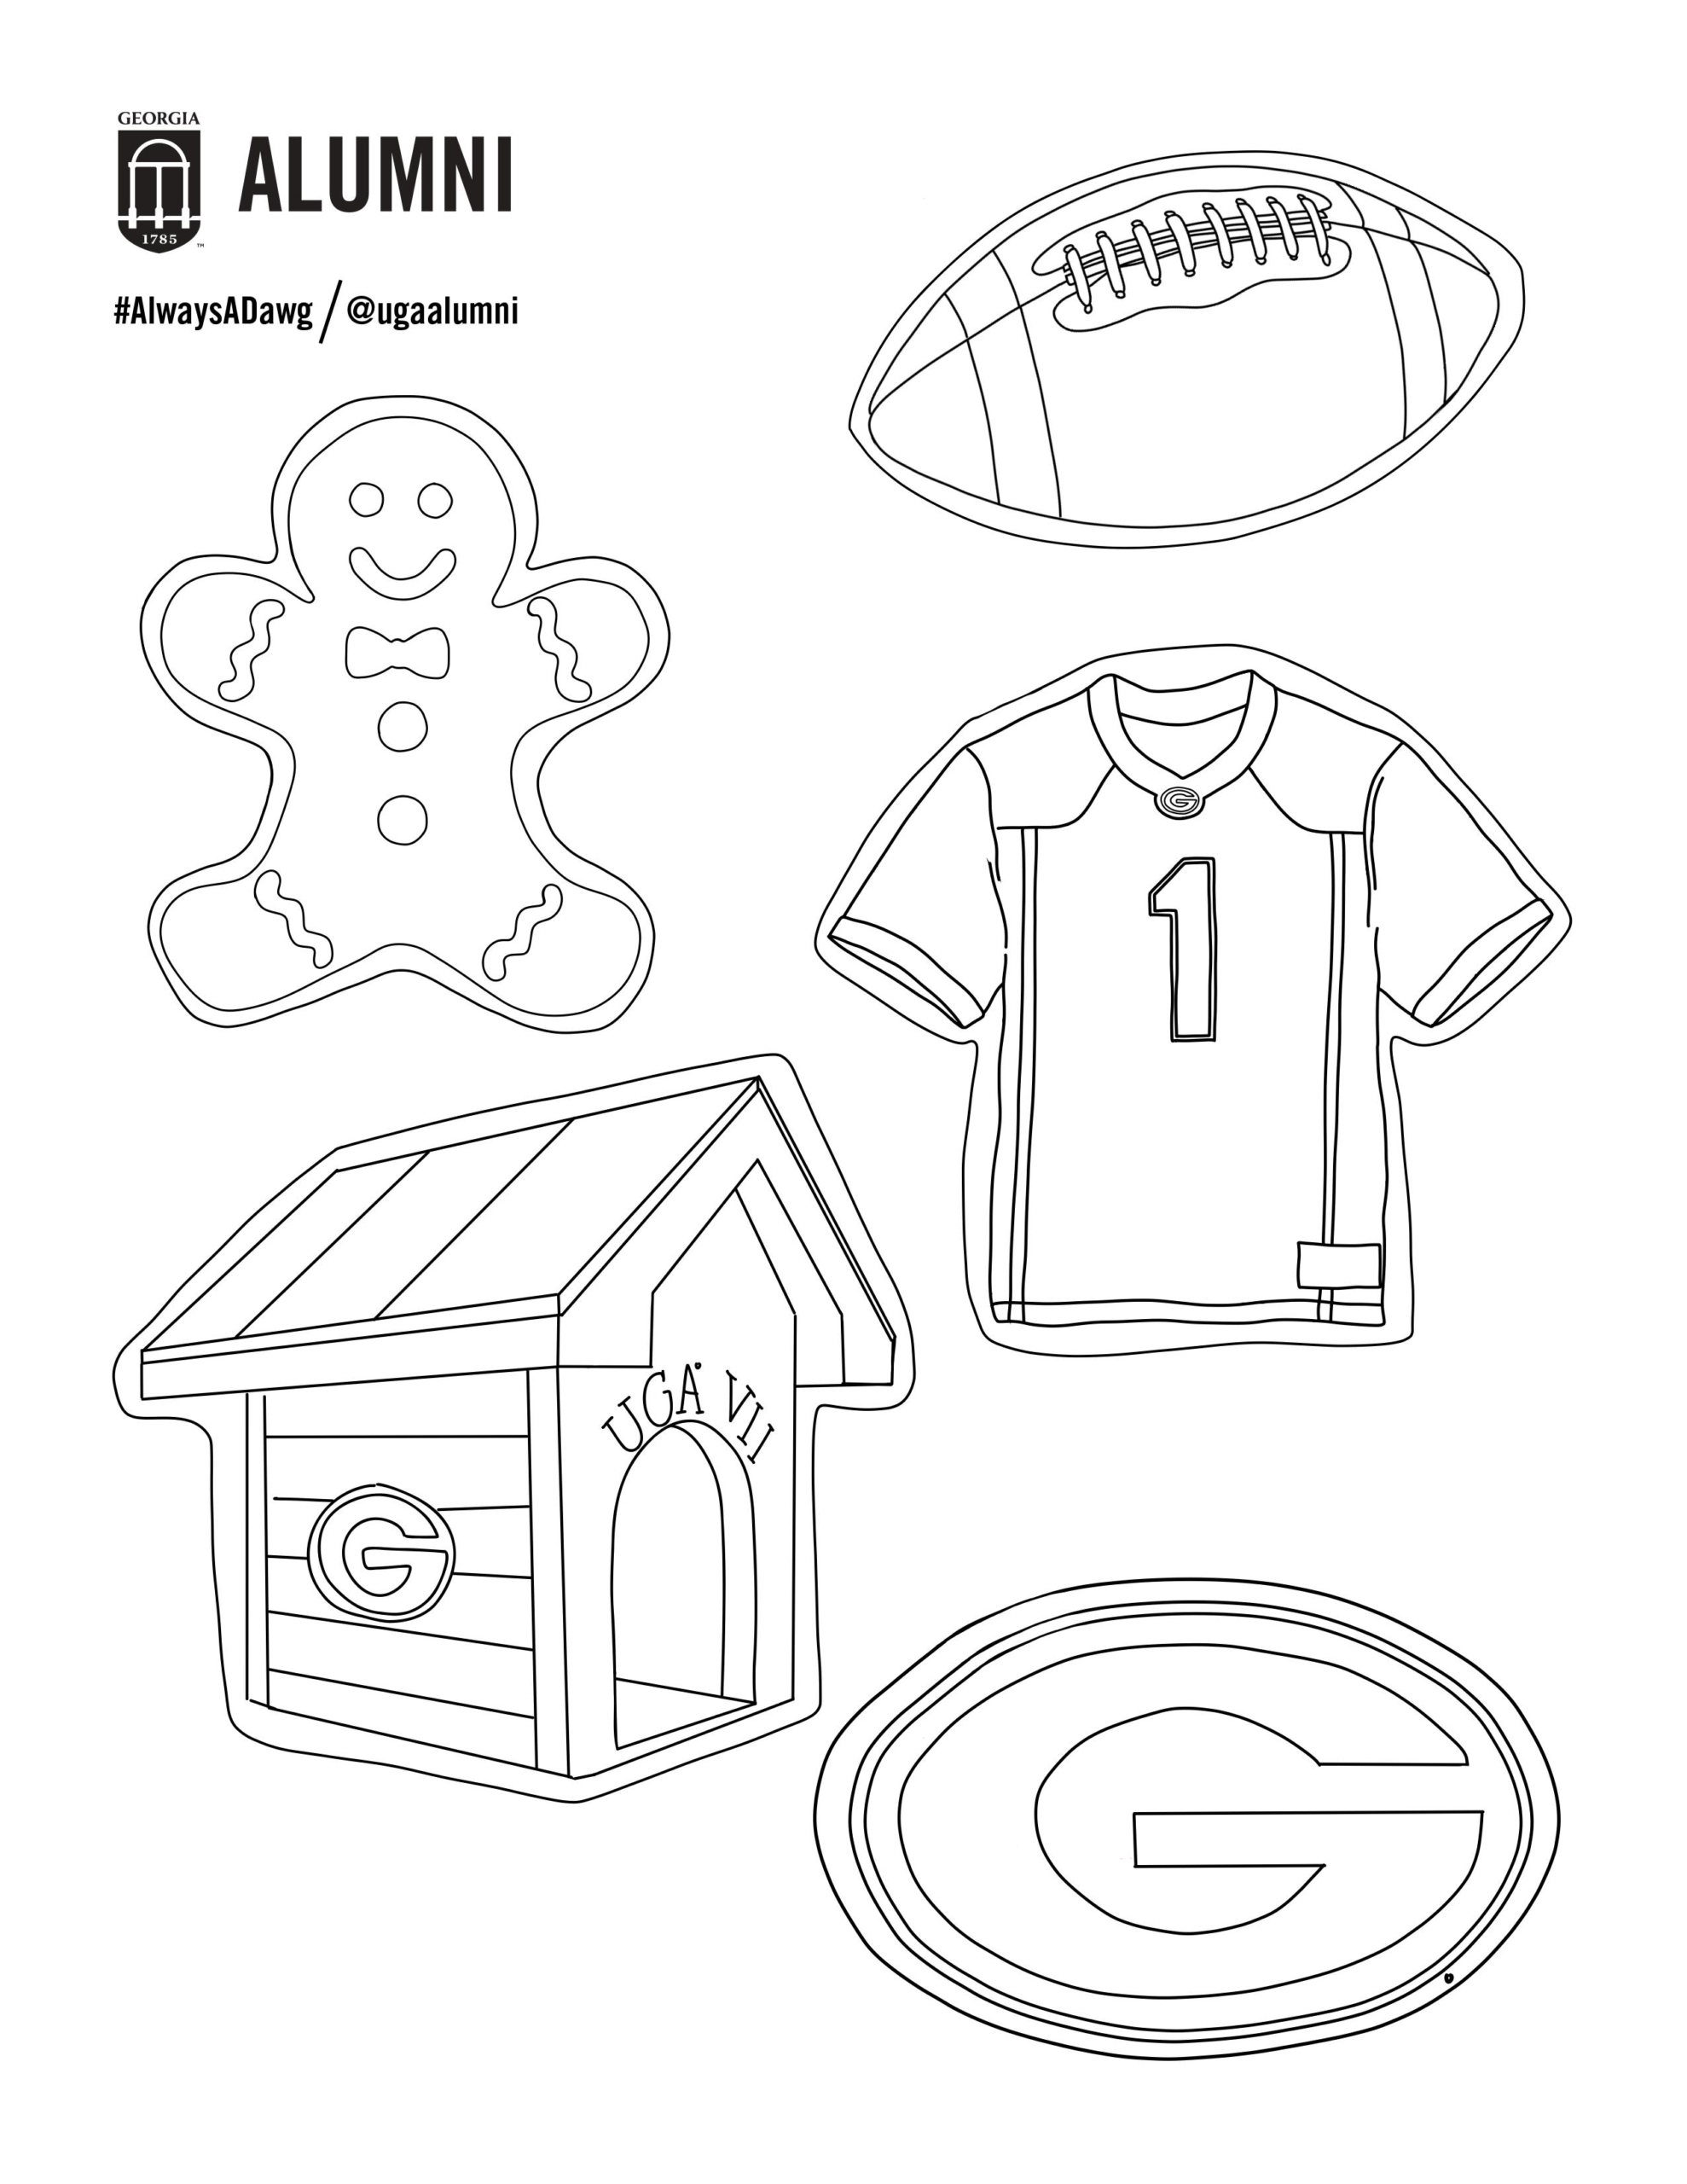 Coloring sheet with a gingerbread man, a football, a dog house, a jersey, and a super G cookie